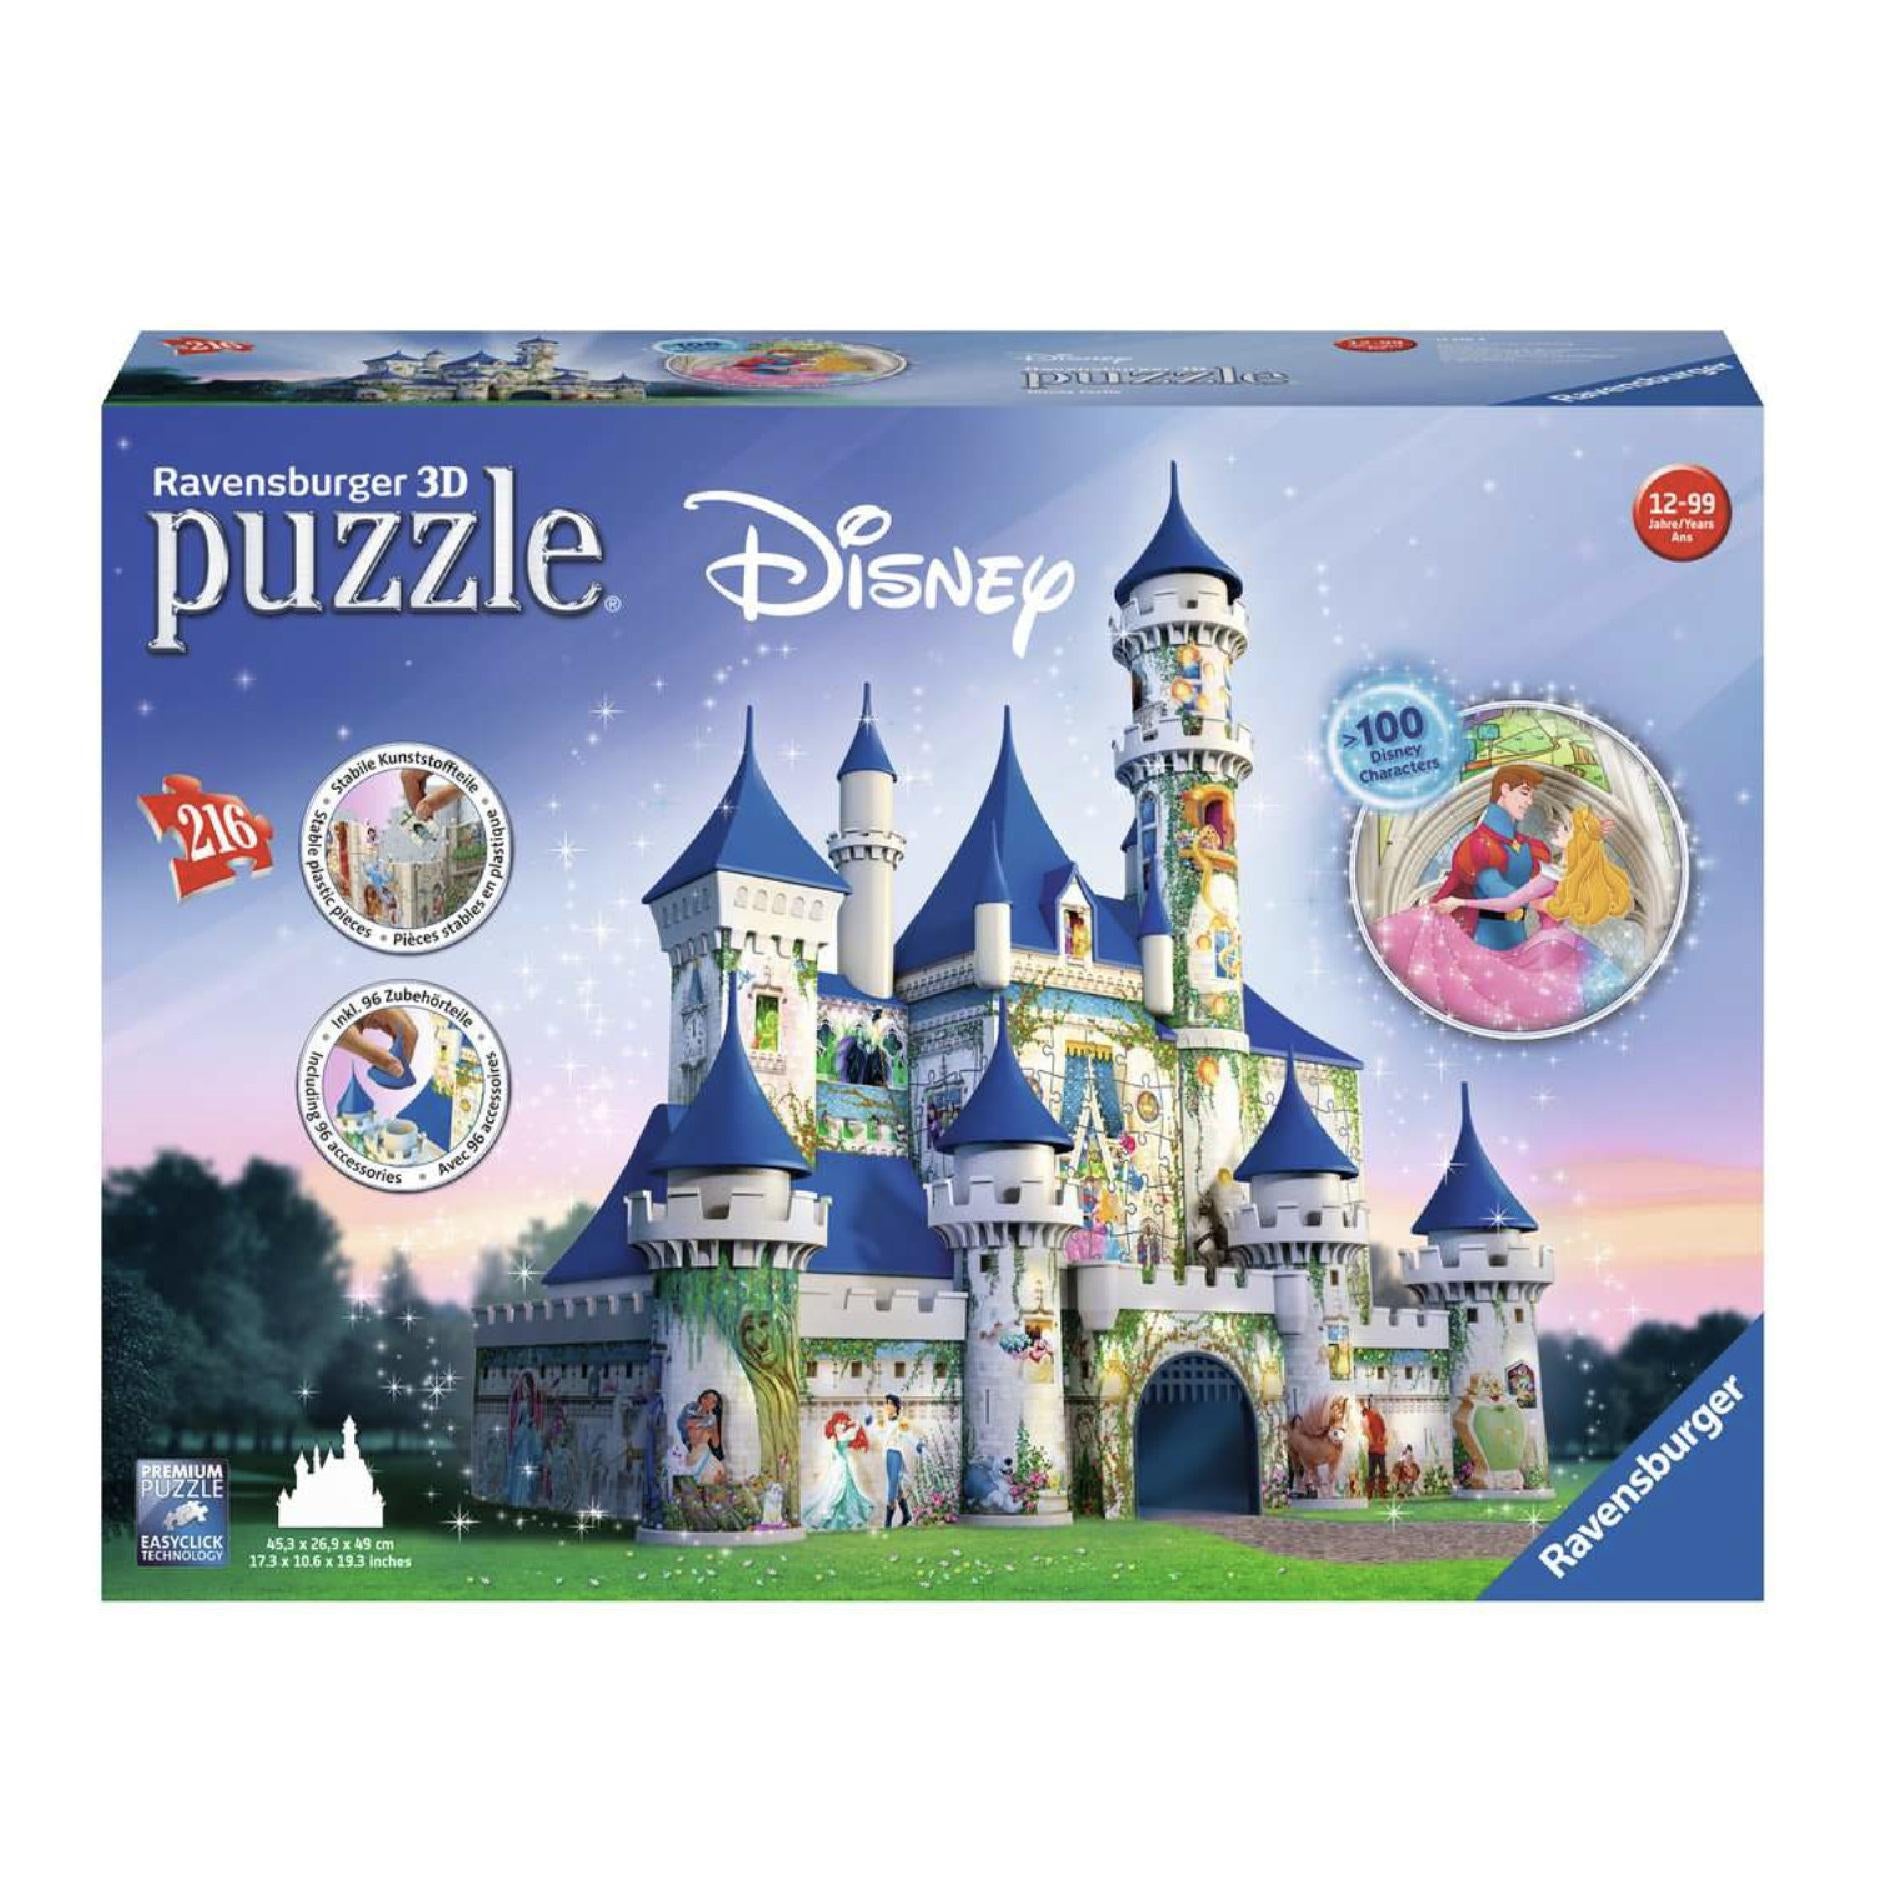 Ravensburger Disney Frozen II Castle 216 piece 3D Jigsaw Puzzle for Kids  and Adults - 11156 - Great for any Birthday, Holiday, or Special Occasion